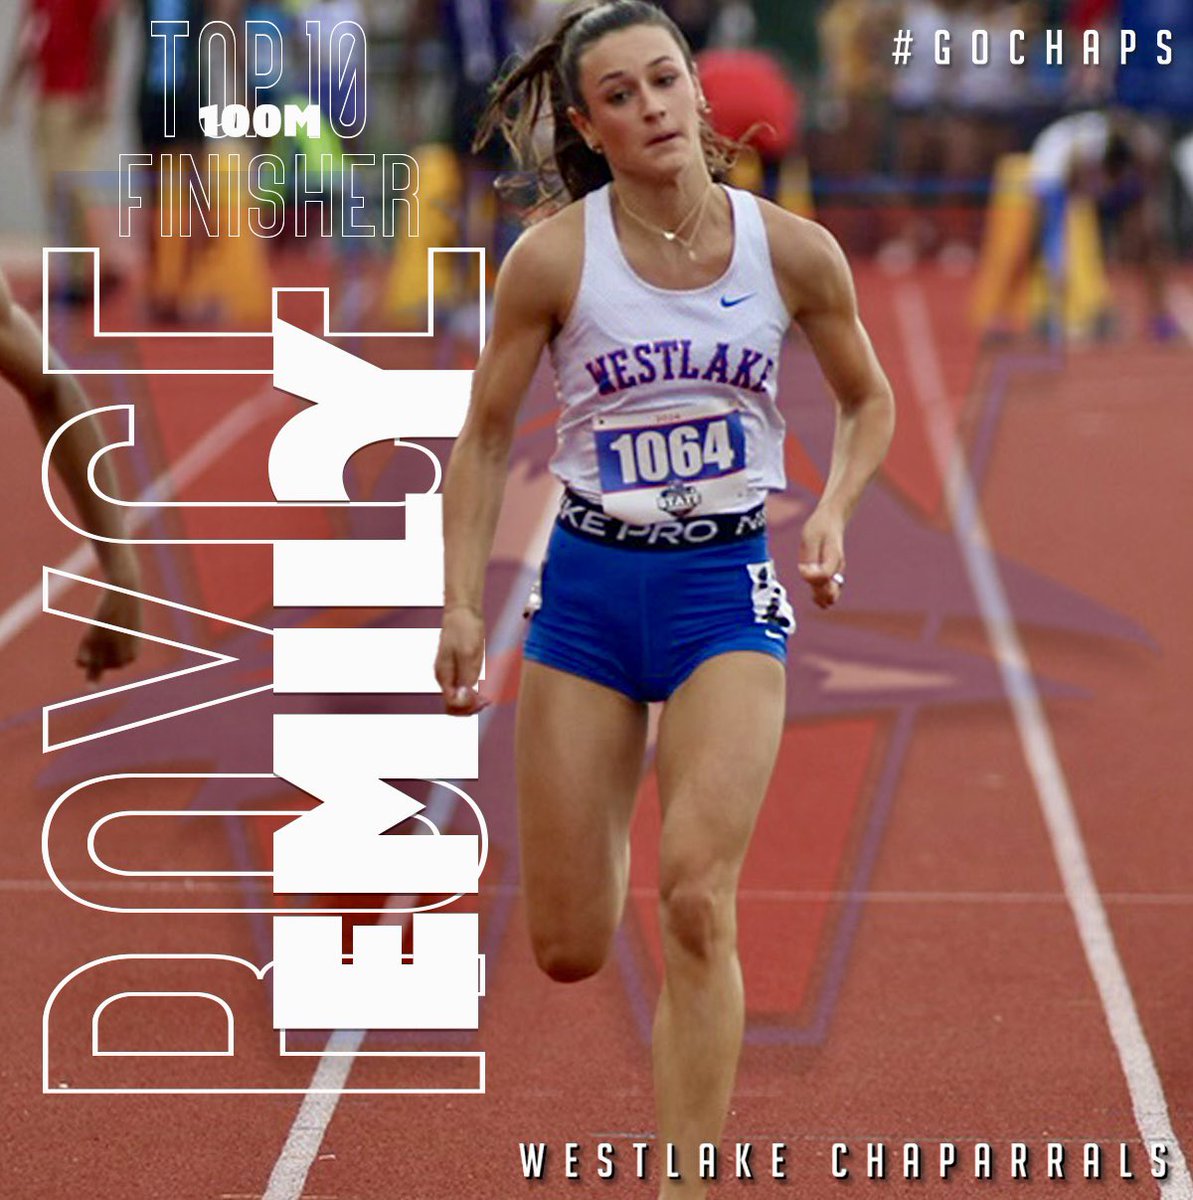 Congratulations to Emily Royce on her top 10 finish at the UIL 6A State Track and Field Meet. Emily’s season concludes with an amazing 9th place finish in 6A. Congratulations, Emily. #GoChaps